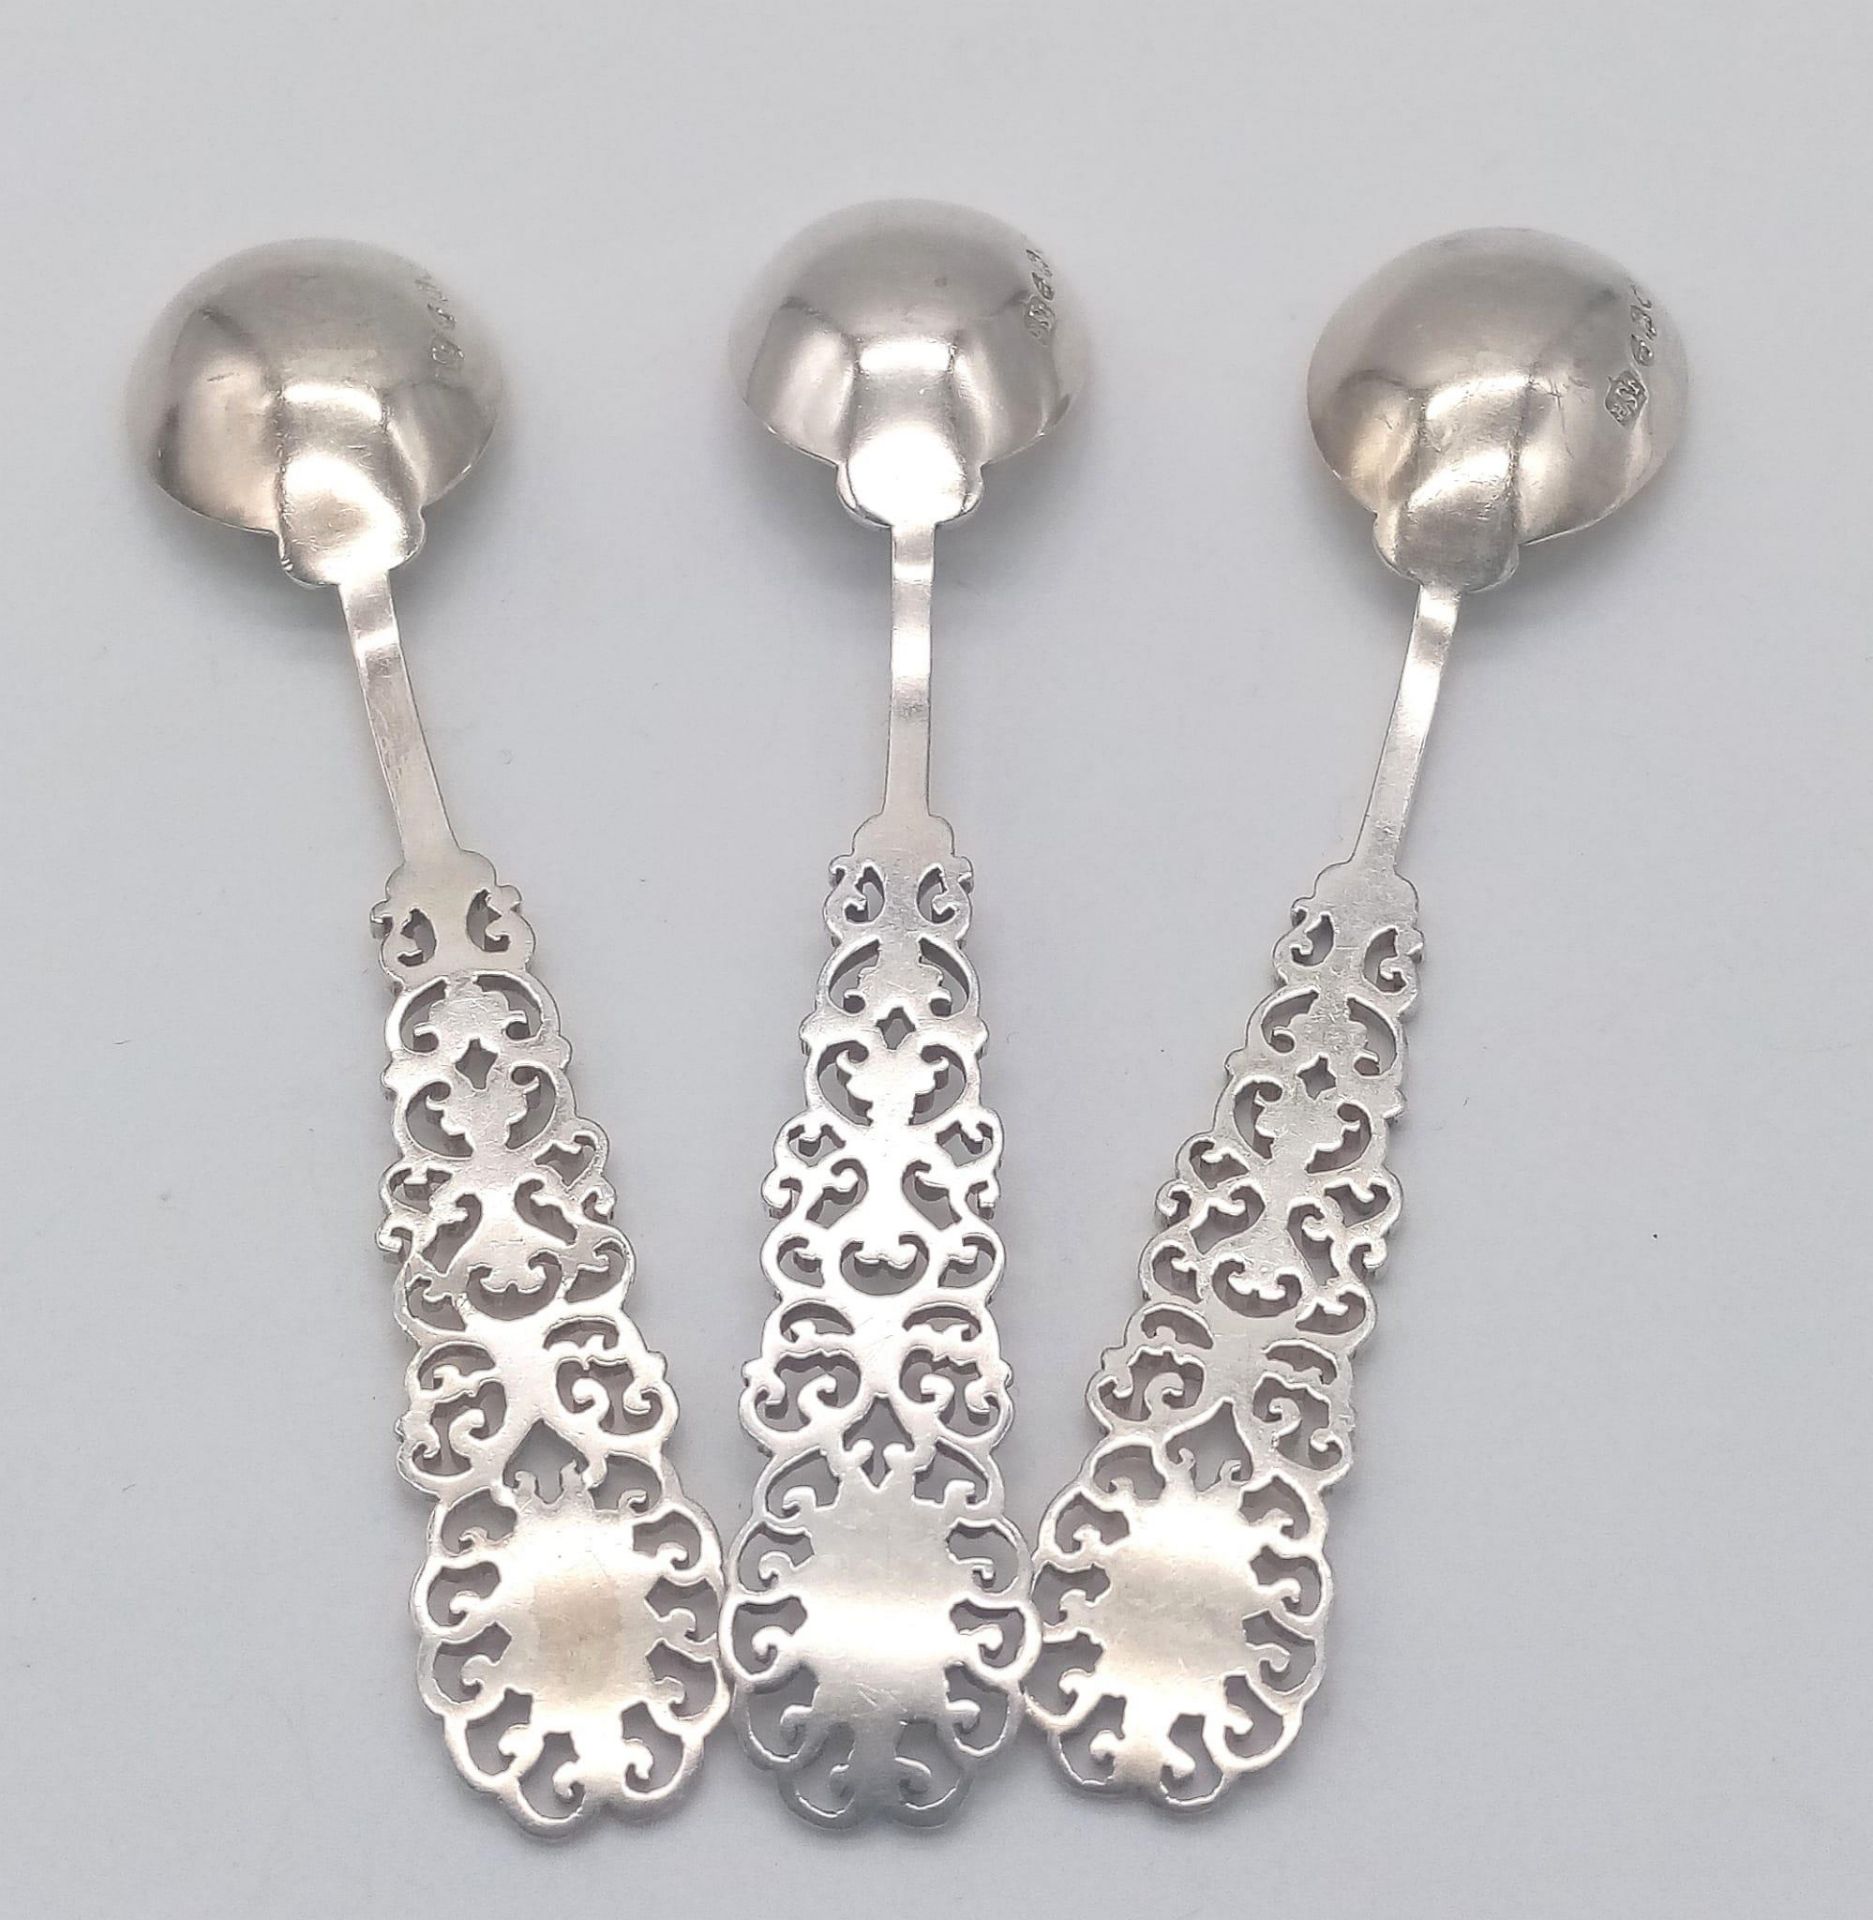 A SET OF 3 ORNATE TEASPOONS MADE IN LONDON IN 1892 WITH FANTASTIC PIERCED WORK HANDLES . 46.9gms - Image 2 of 4